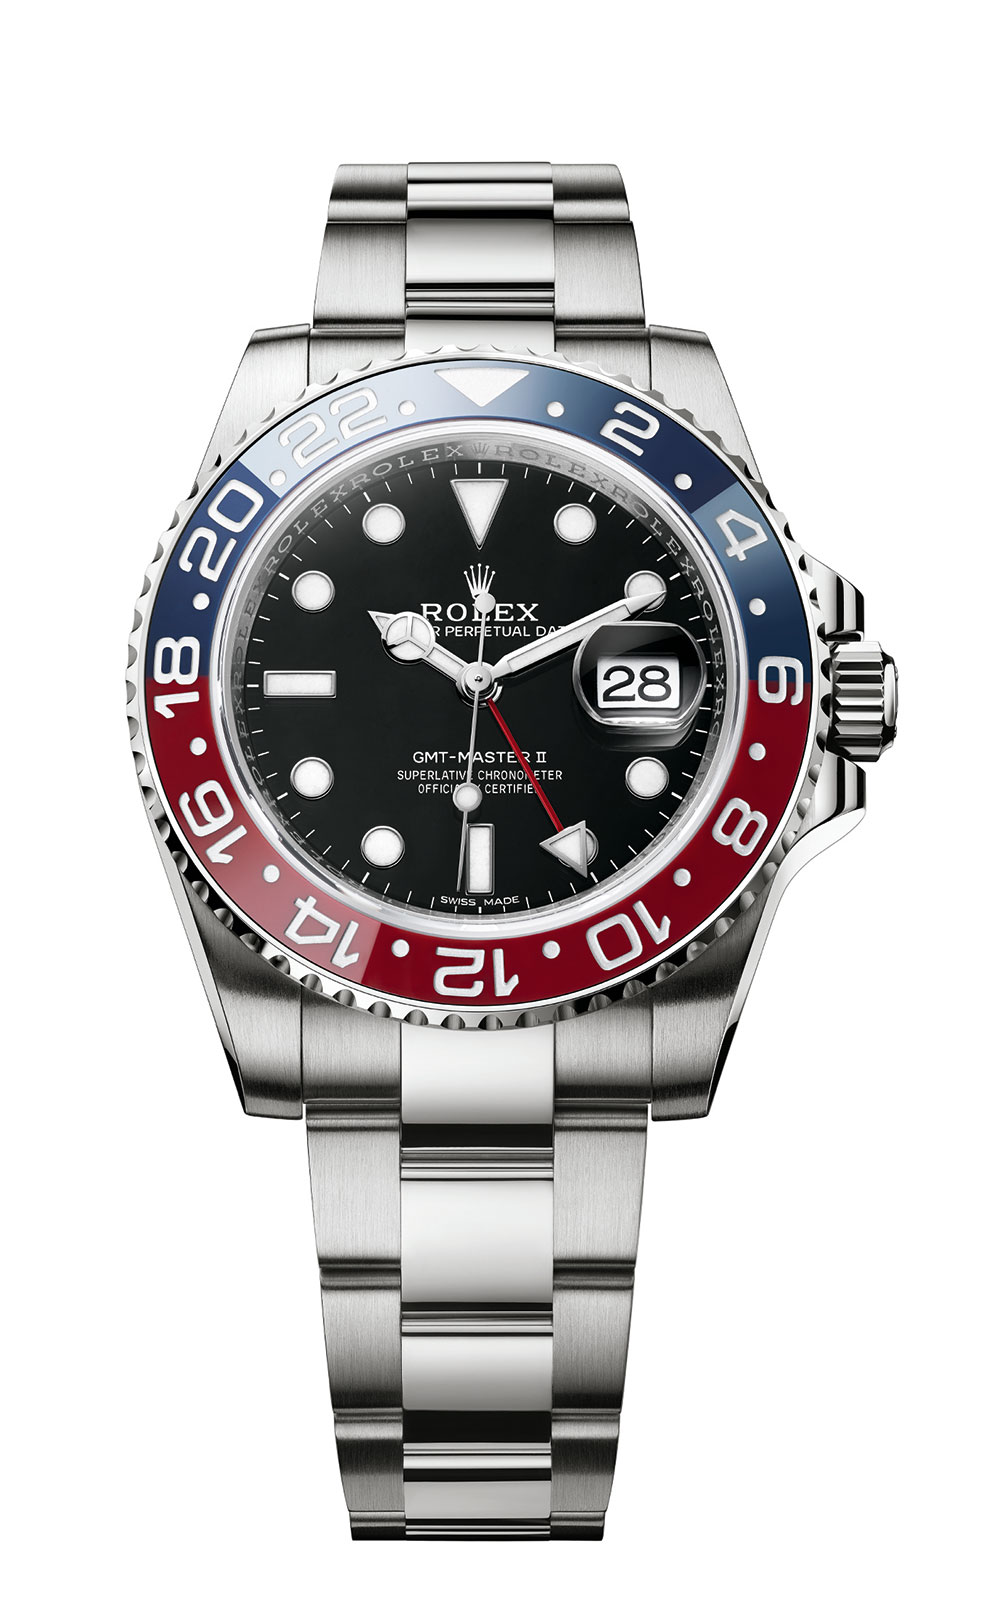 Đồng hồ Rolex Oyster Perpetual GMT-Master II